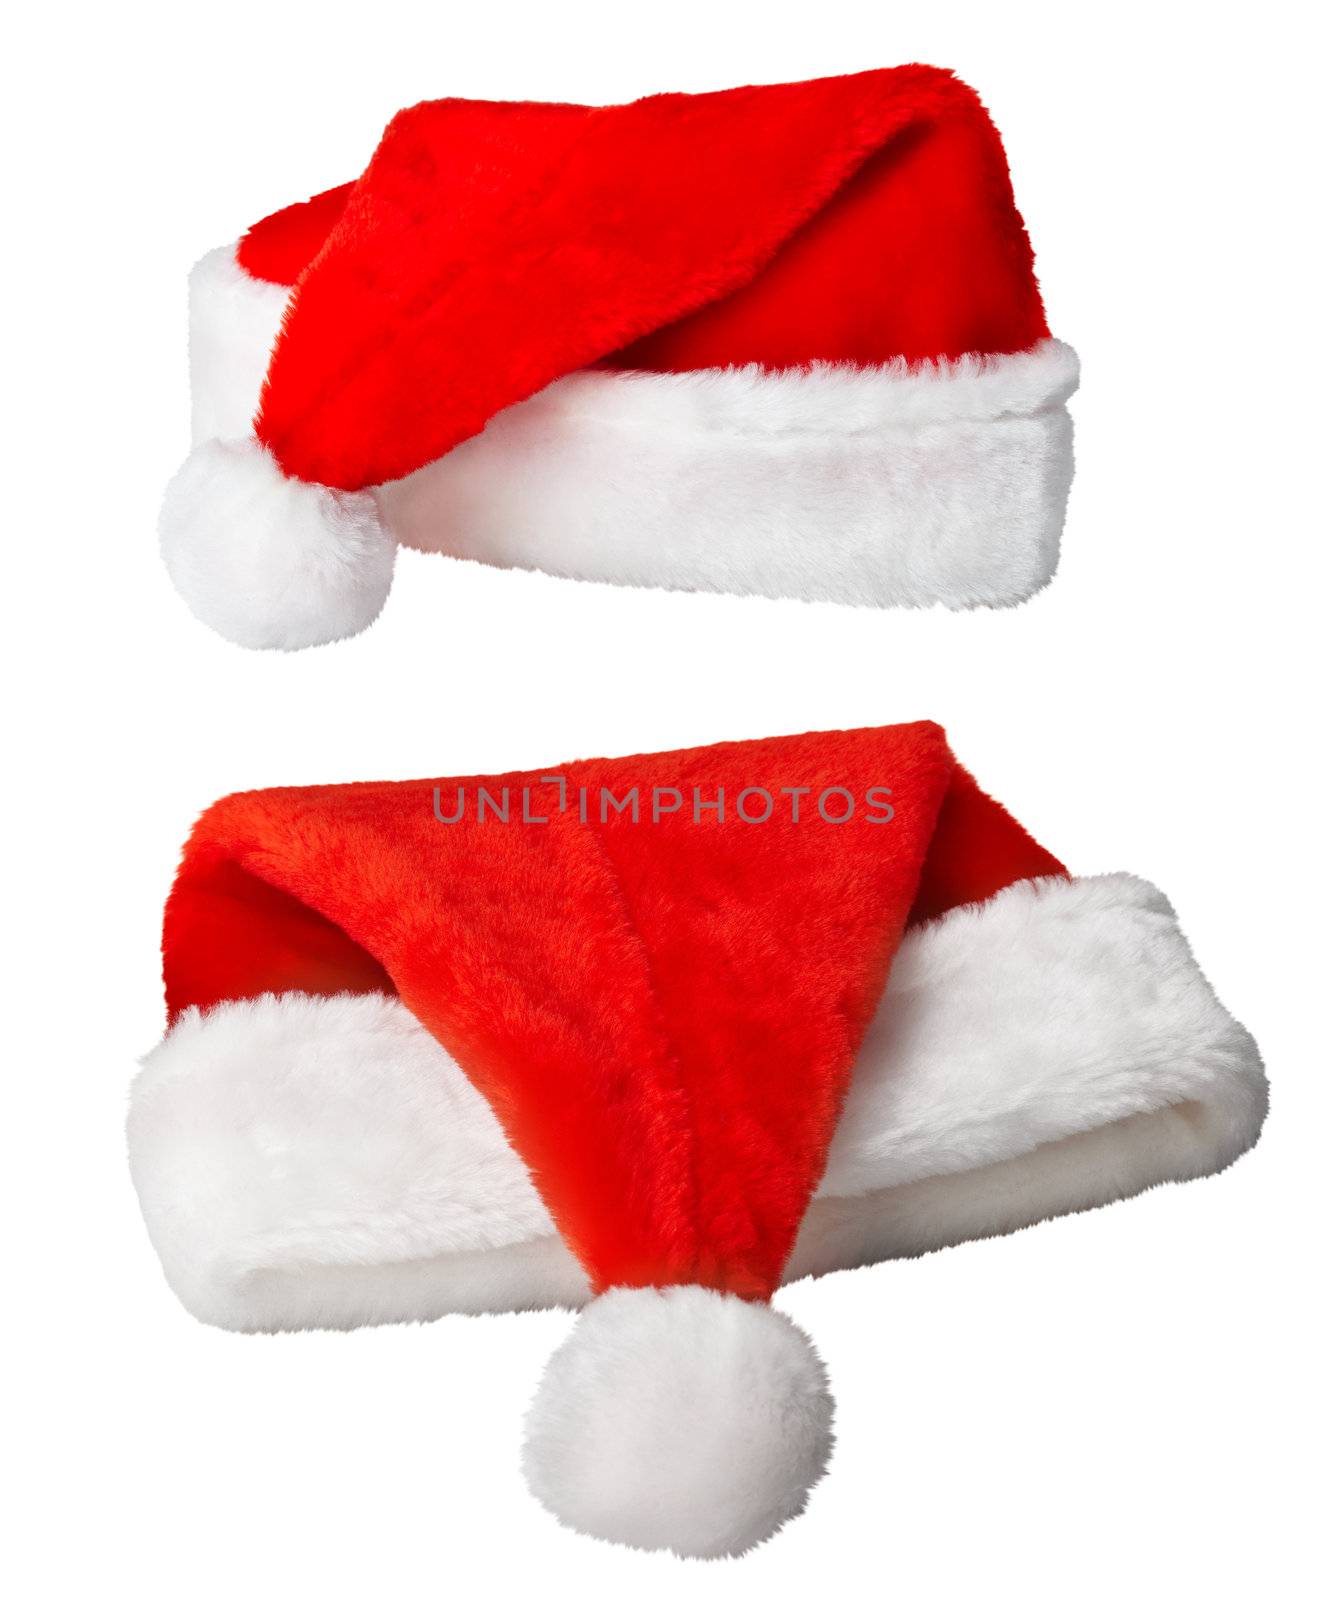 Red Christmas Santa Claus hats isolated on white background